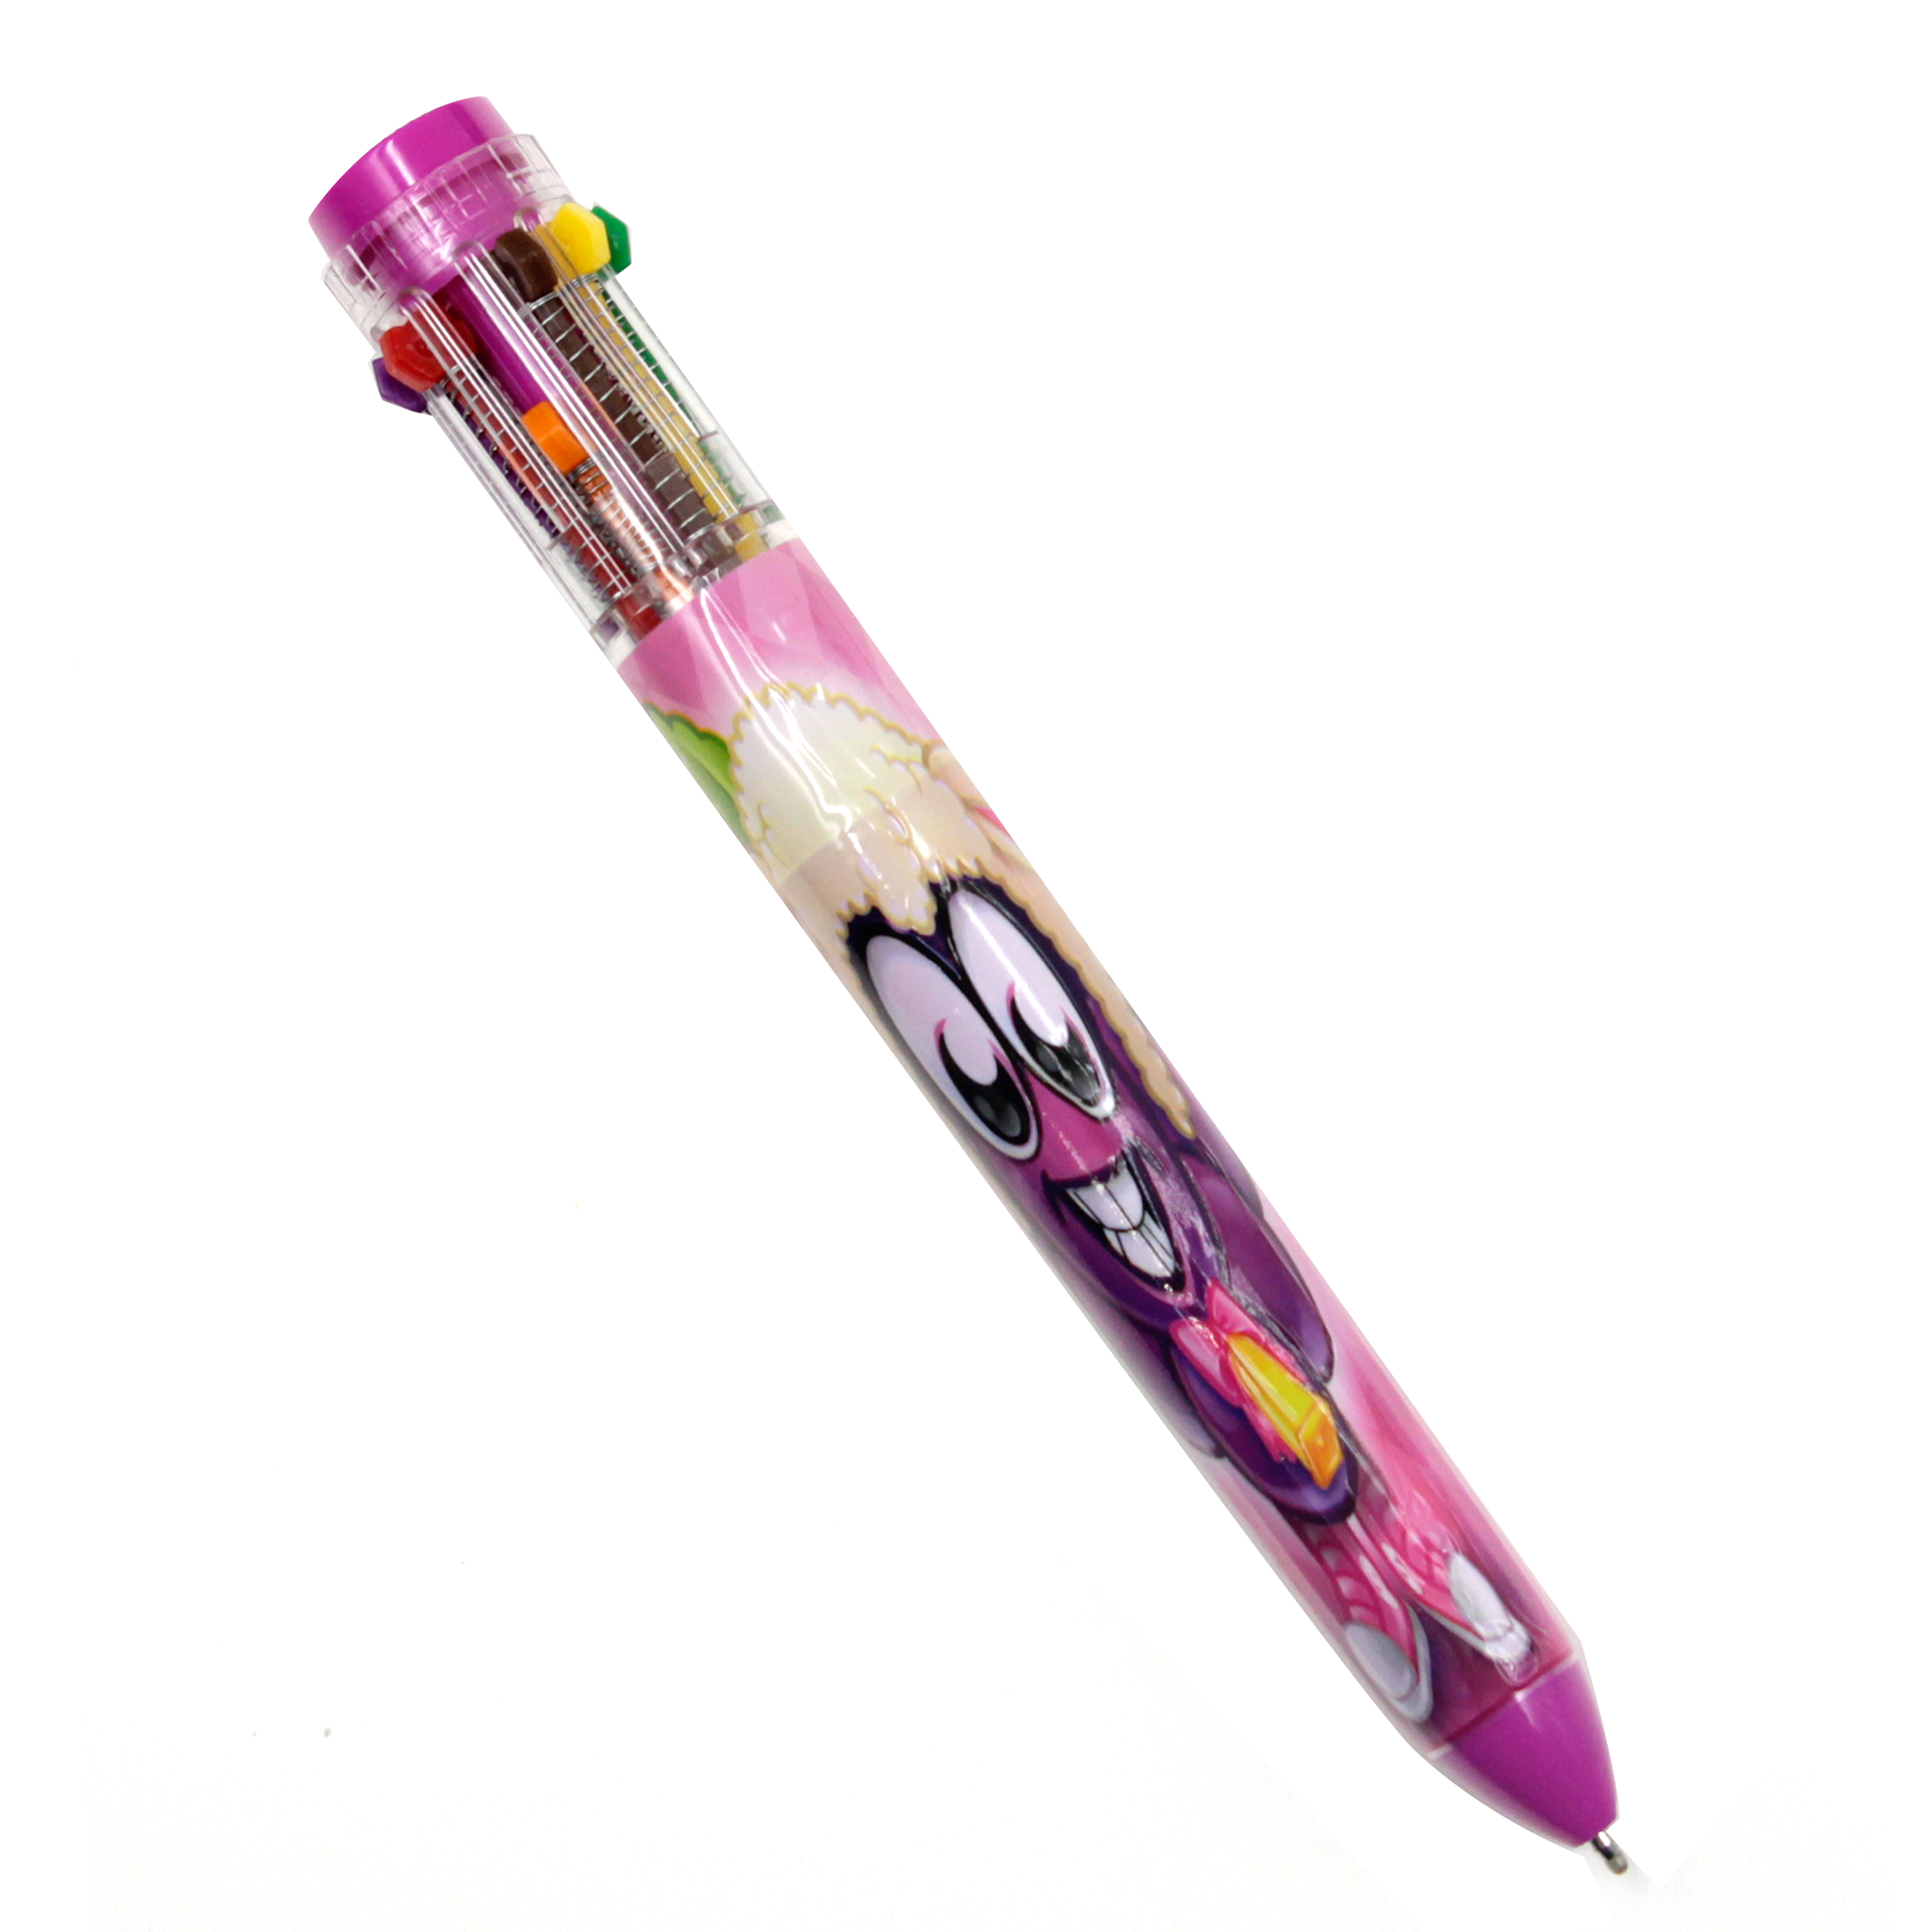 Scentos Easter Themed Scented Ballpoint Purple Rainbow Pen with 10 Colors - Ages 3+, Stationary & Stationary Sets - image 5 of 5